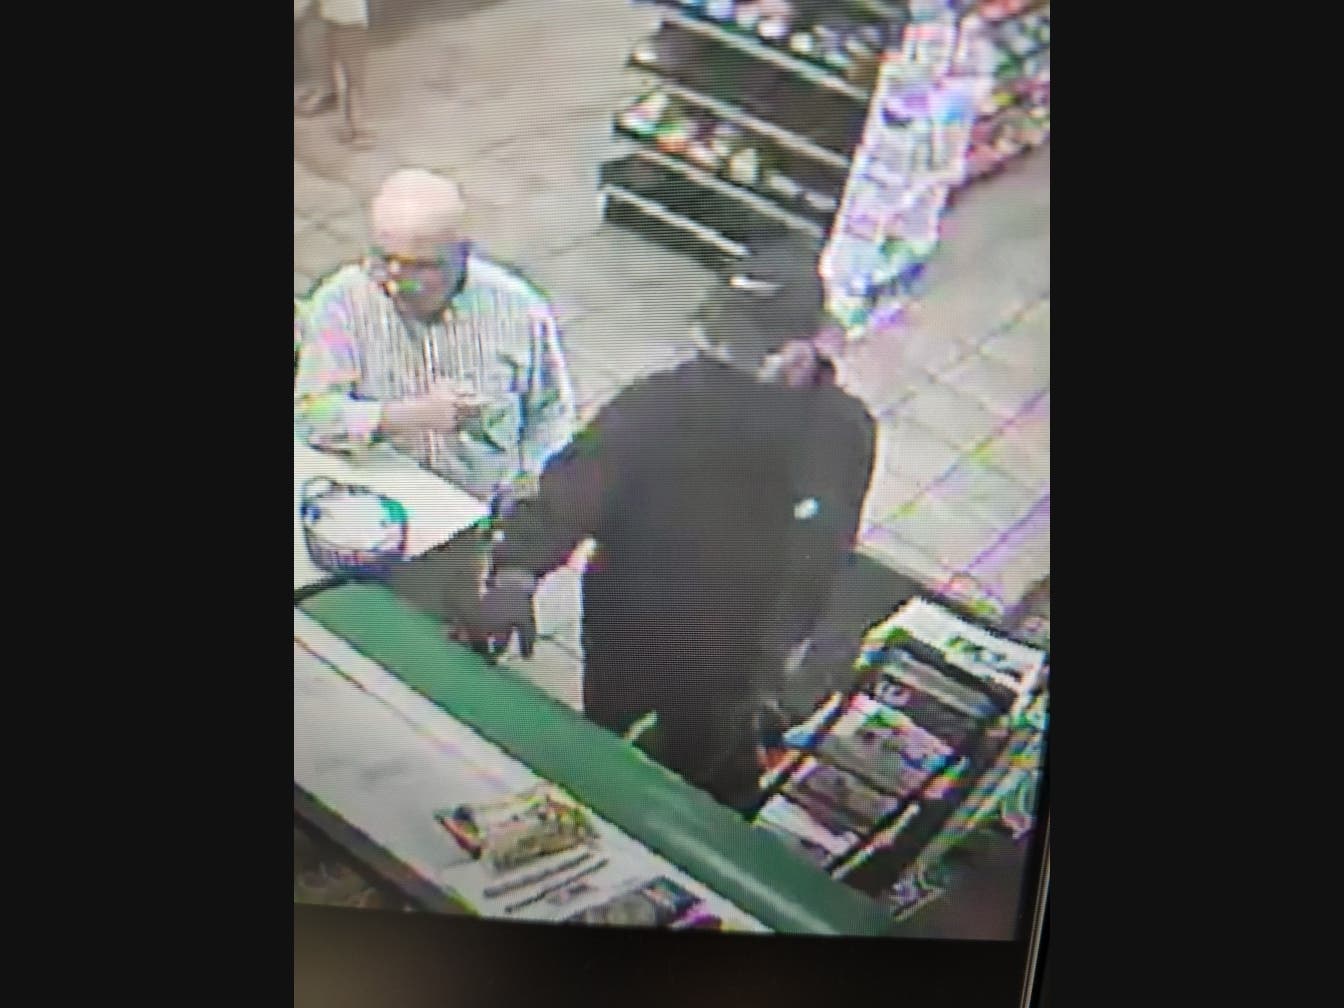 https://patch.com/img/cdn20/users/22870800/20240624/111946/styles/patch_image/public/middletown-armed-robbery-1___24111745715.jpg